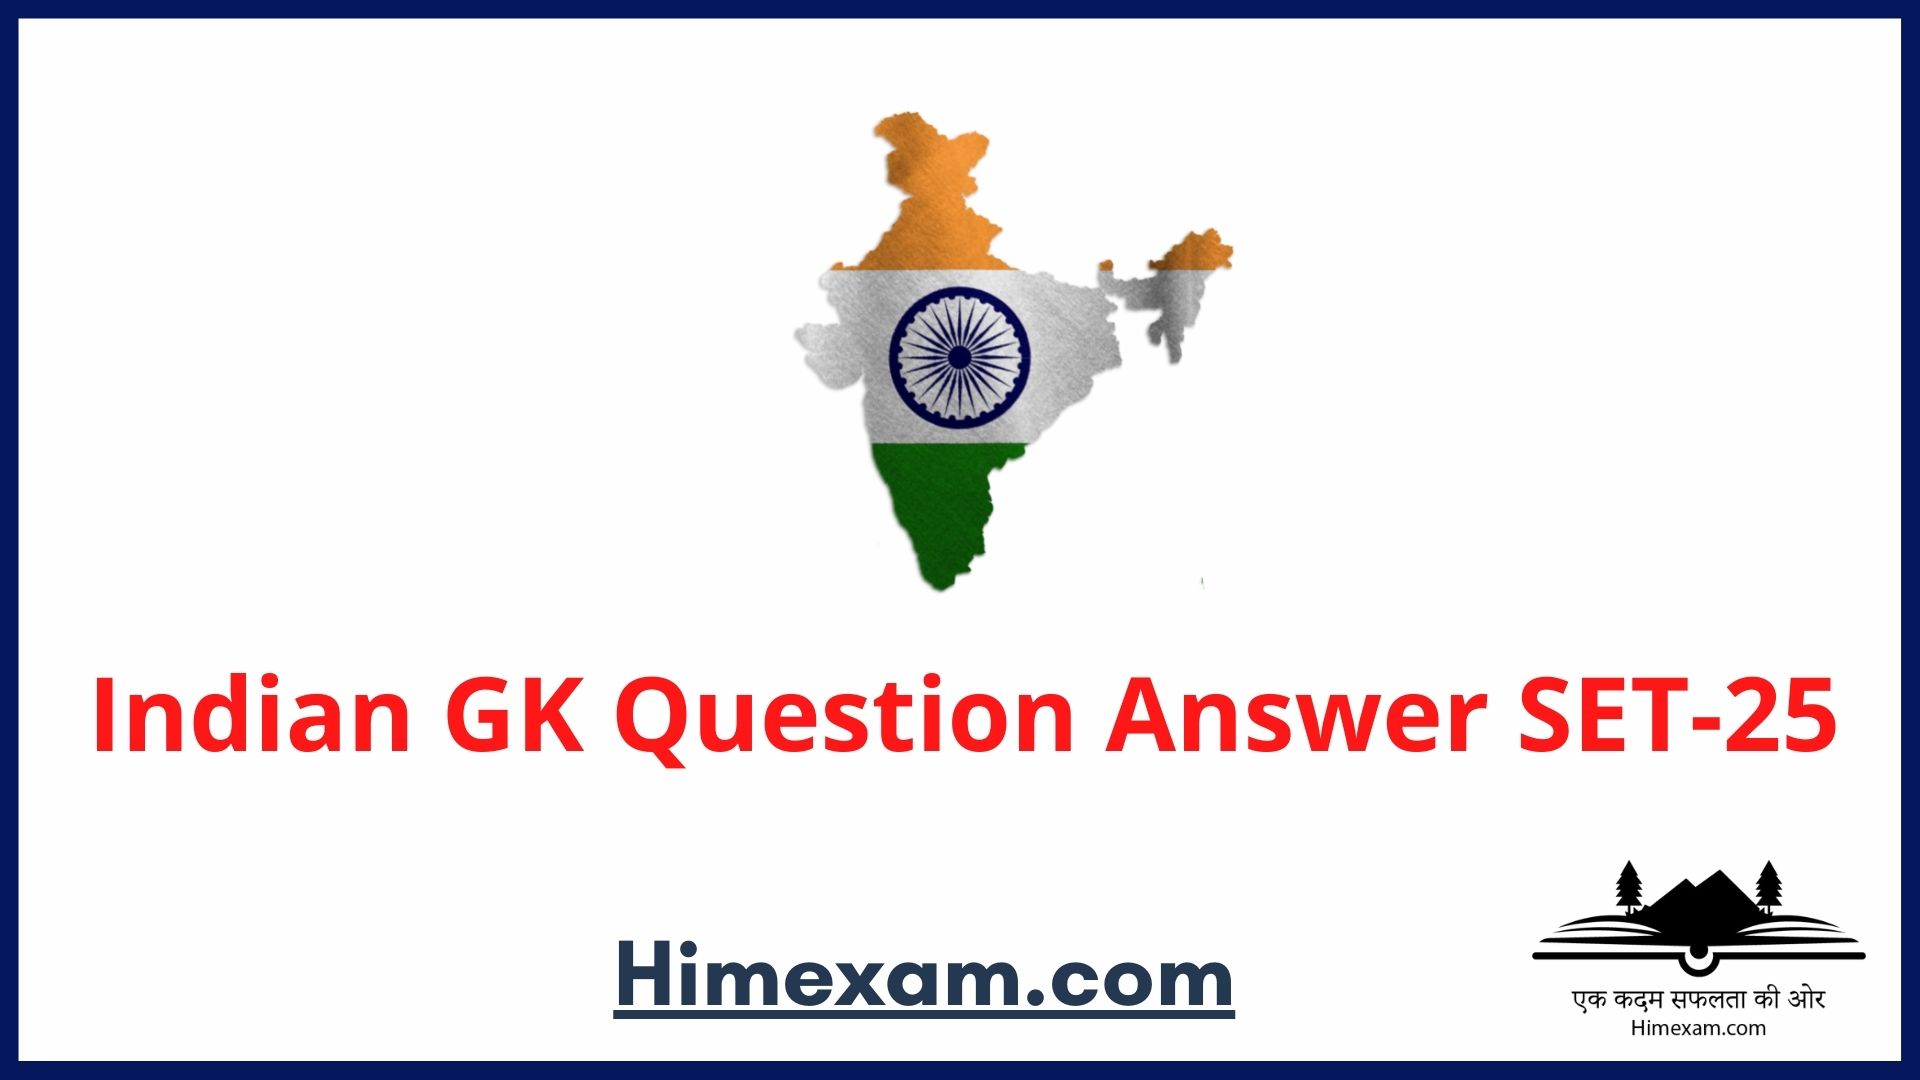 Indian GK Question Answer SET-25